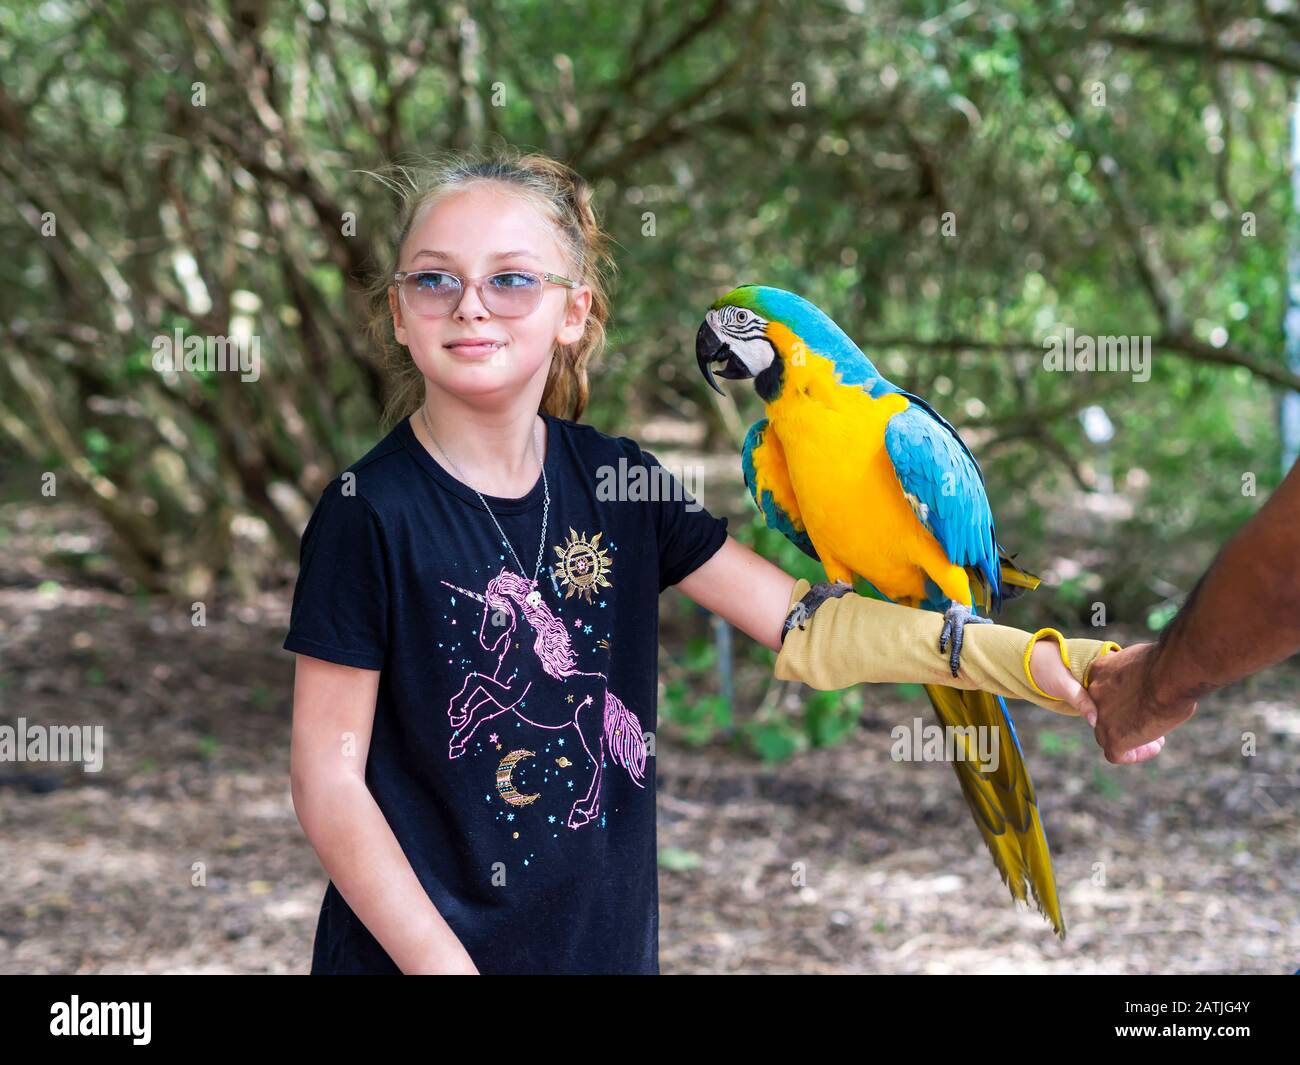 A young Caucasian girl with glasses in a unicorn t-shirt with Blue and Gold Macaw on her arm. South Texas Botanical Gardens, Corpus Christi, Texas USA. Stock Photo